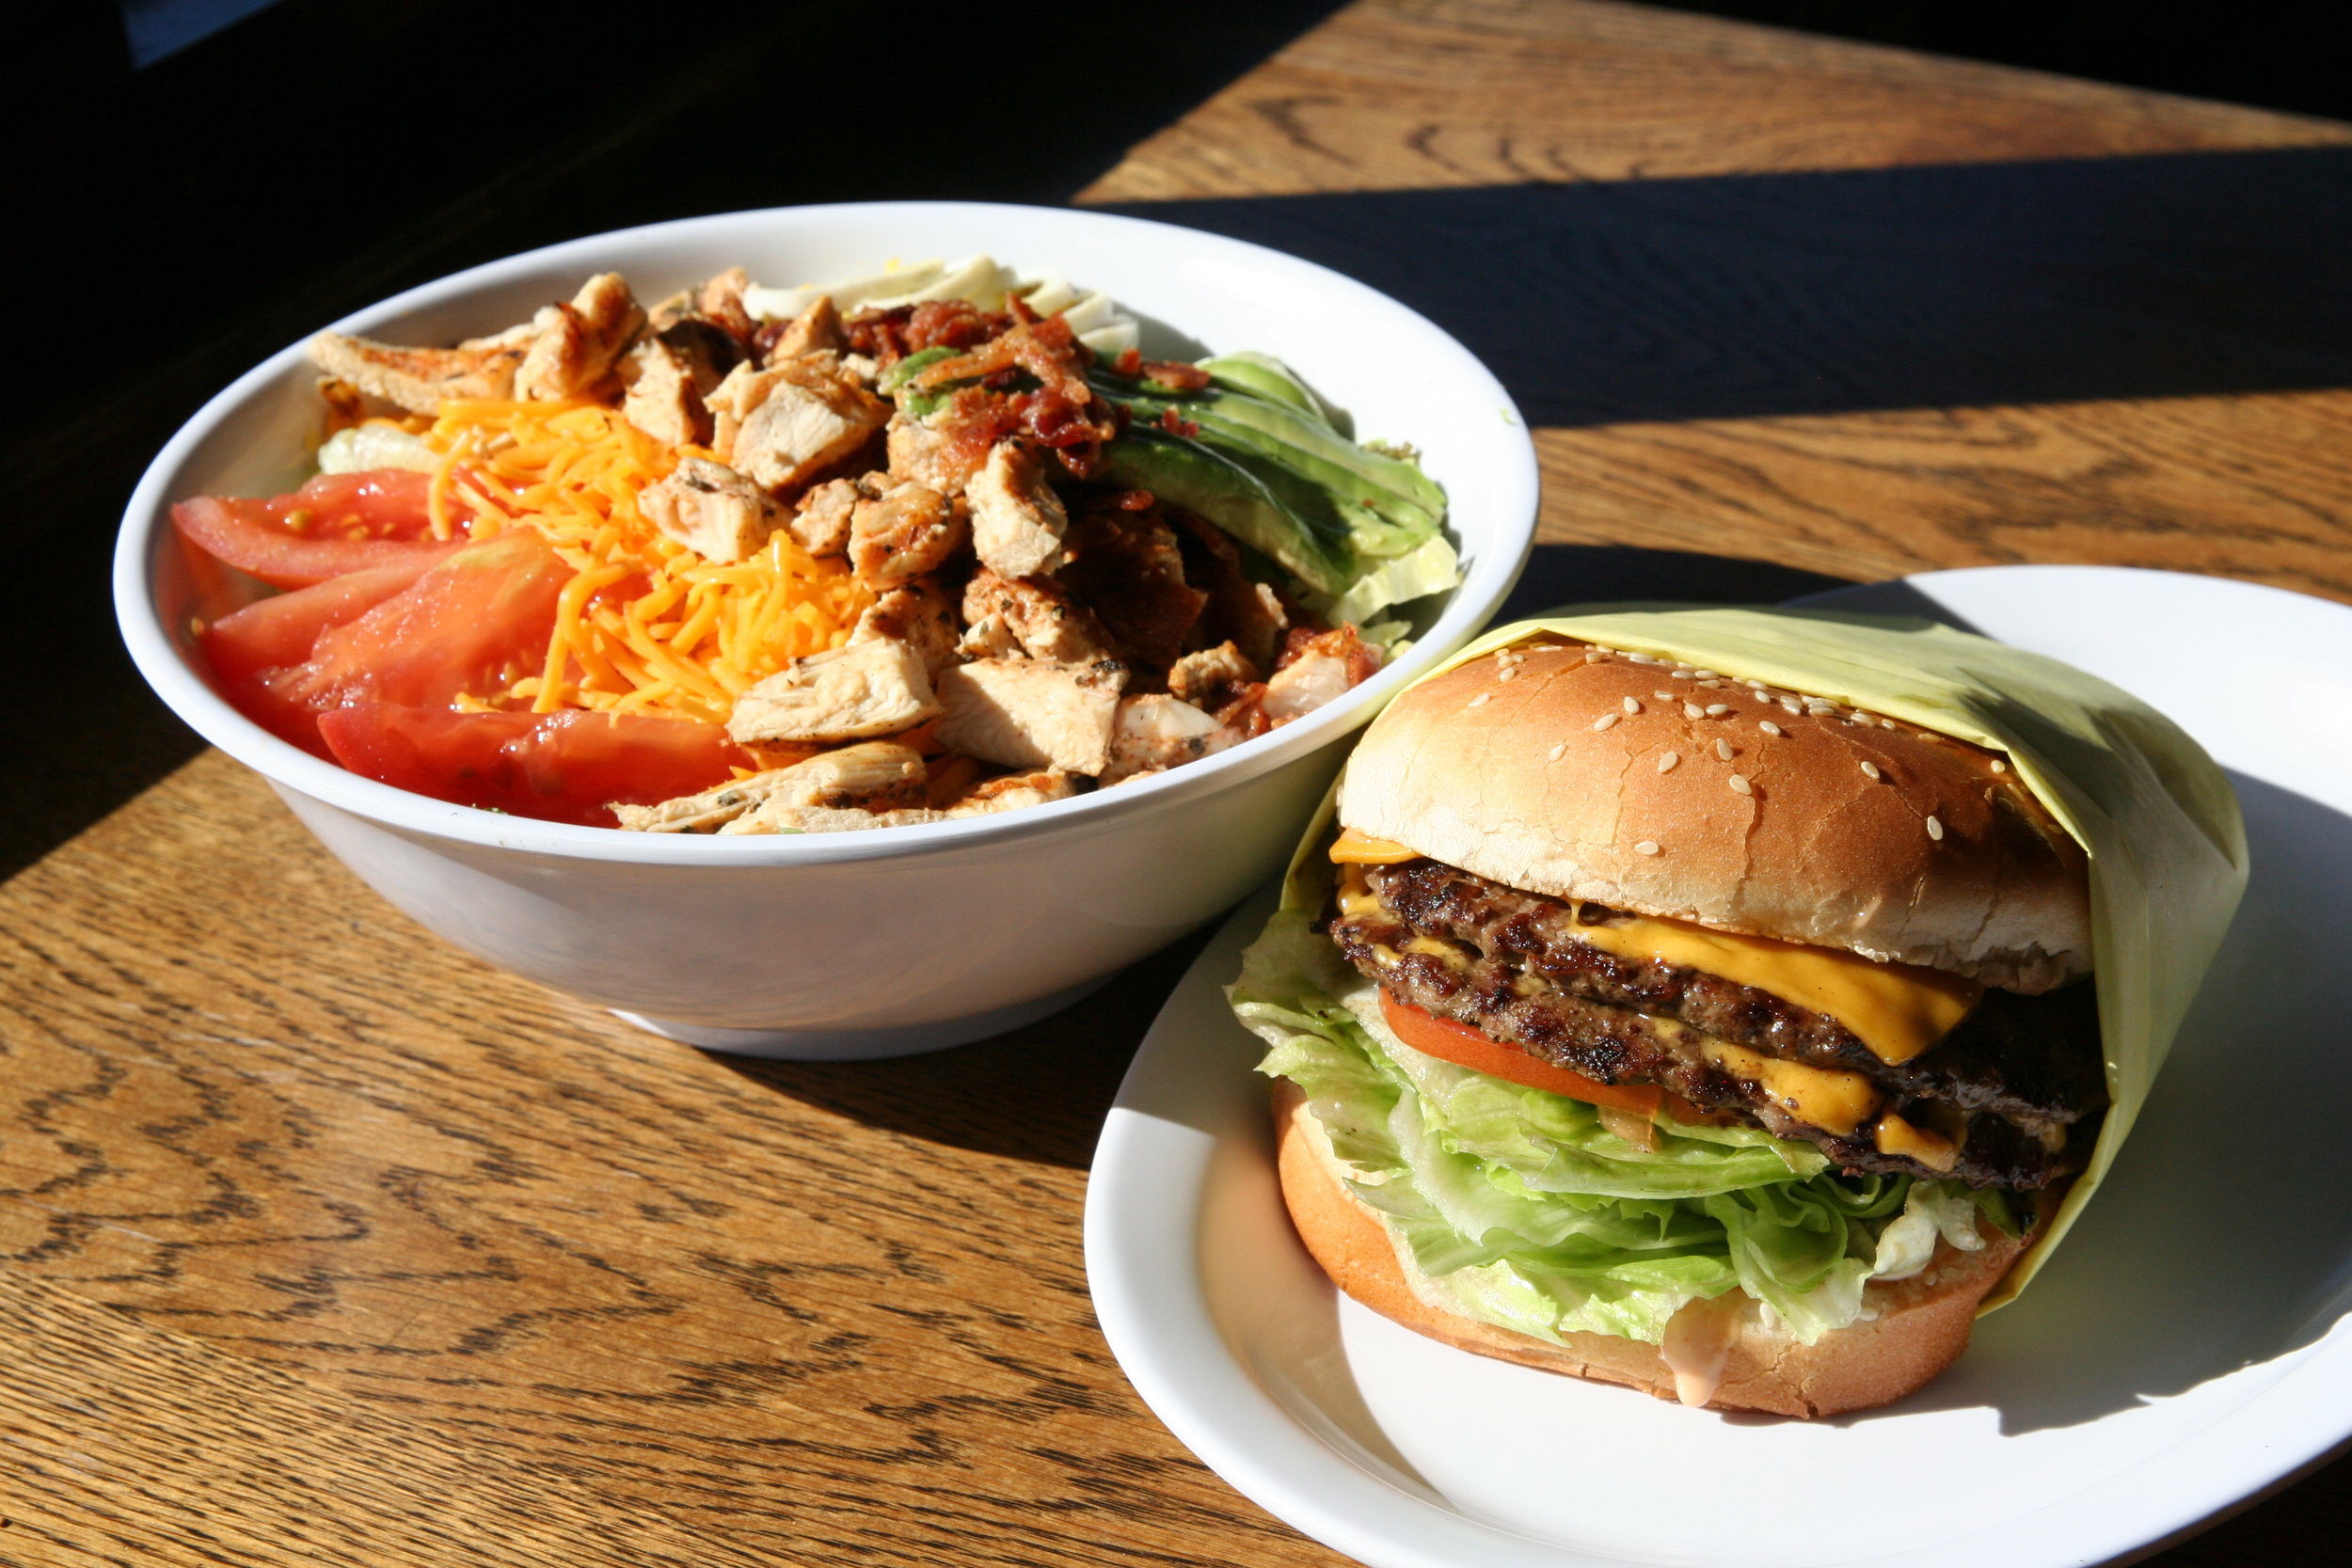 Double Cheese Burger and Grilled Chicken Salad